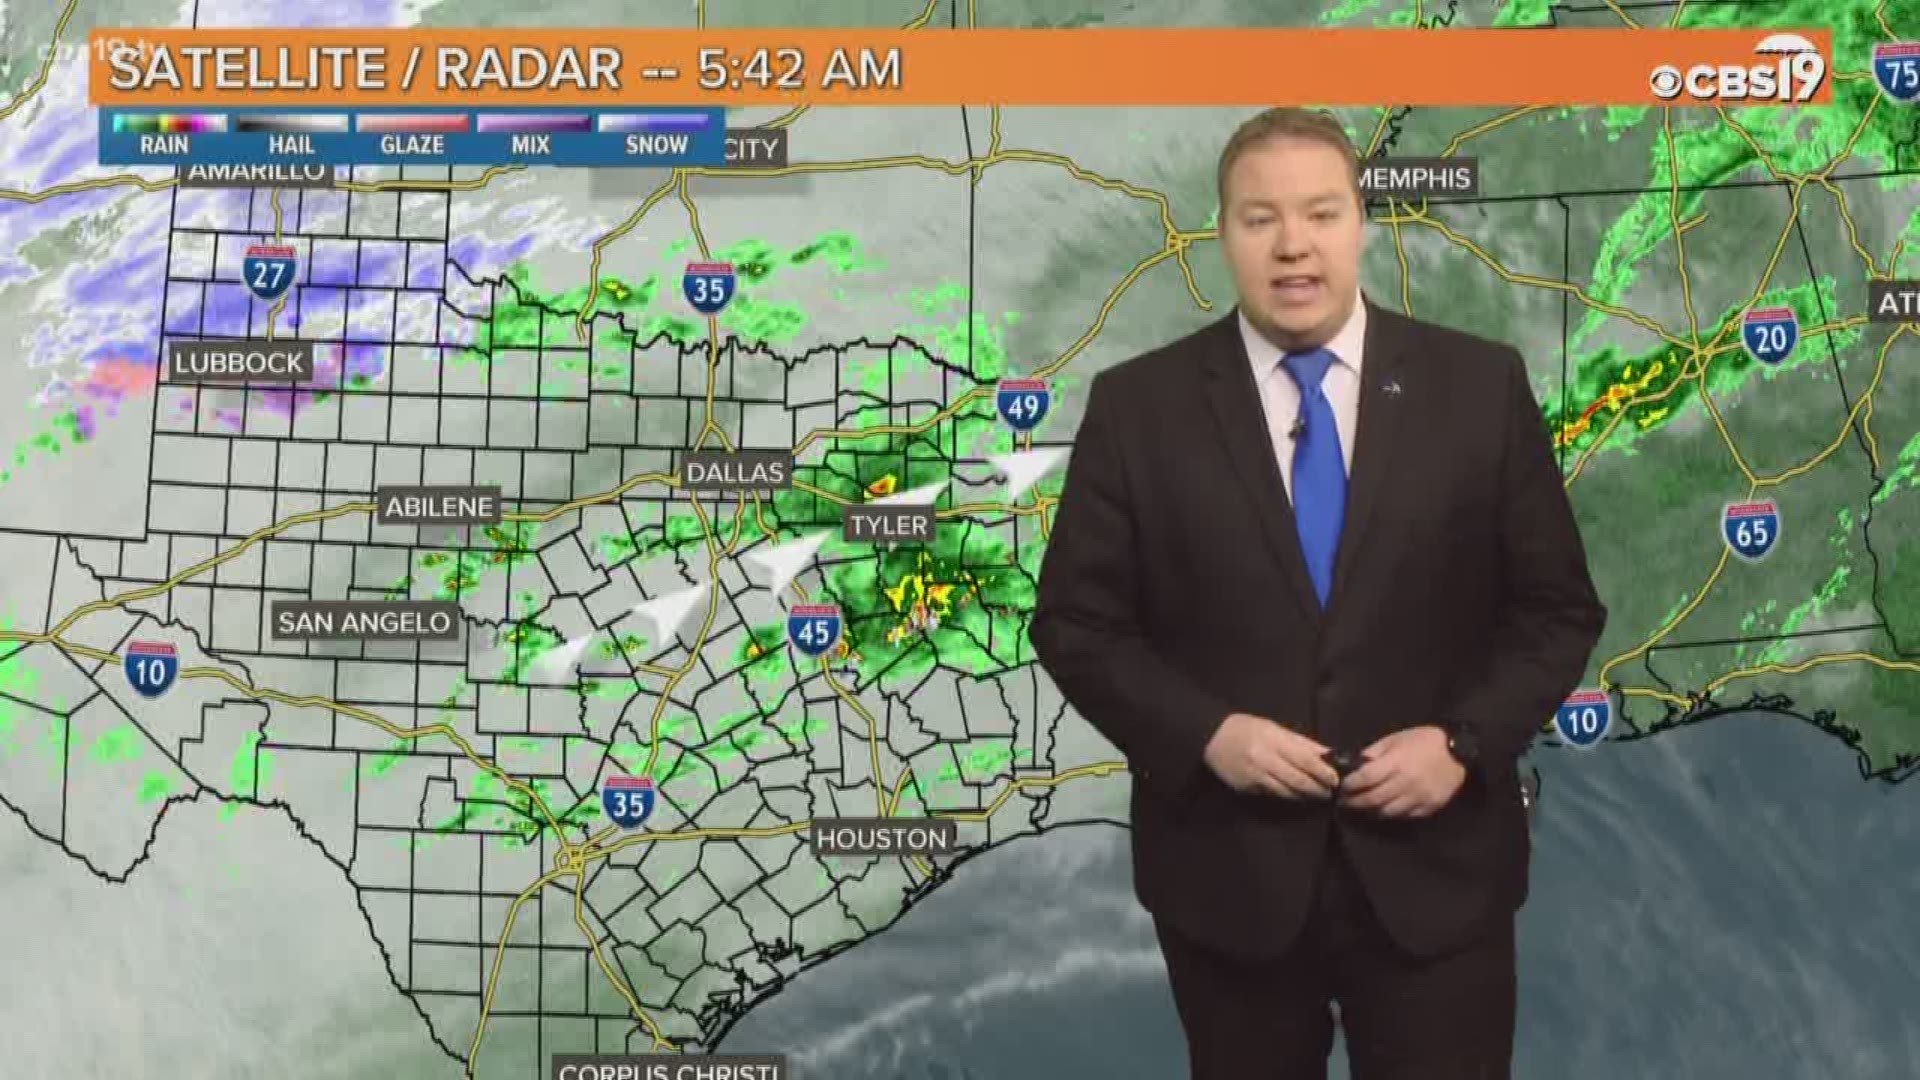 Heavy rain and a few storms will continue into today for East Texas. Meteorologist Michael Behrens has the latest forecast on what to expect!